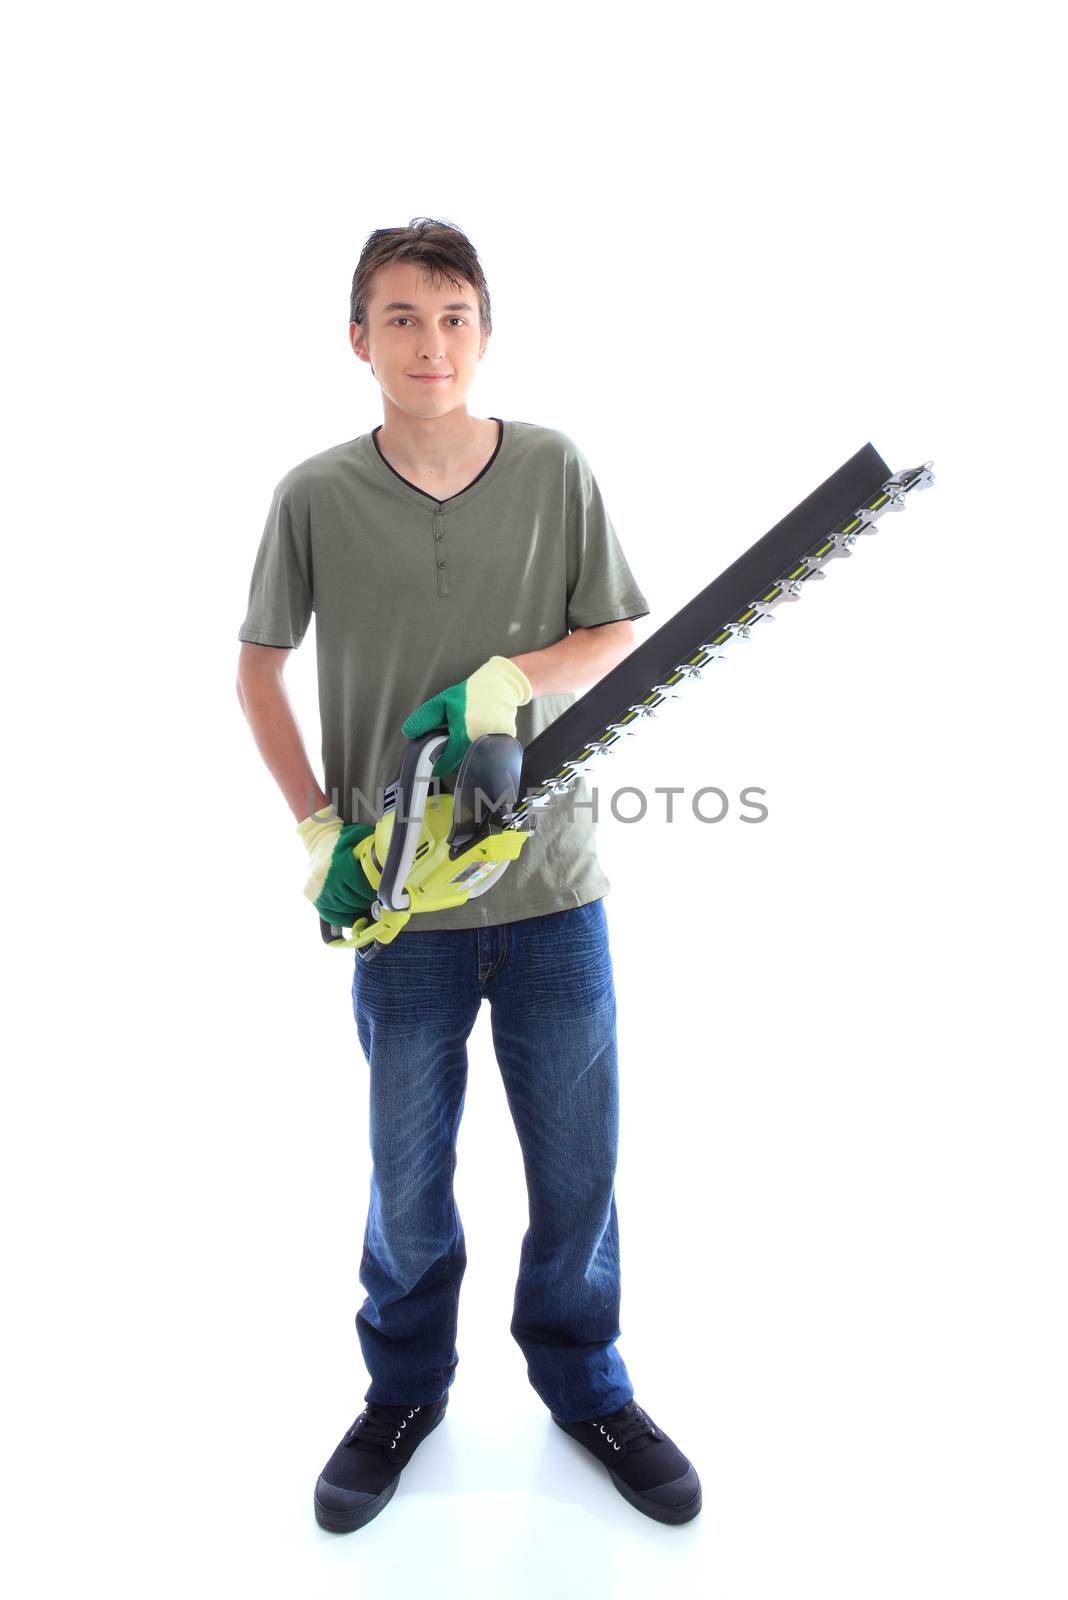 Male holding a hedge trimmer garden tool